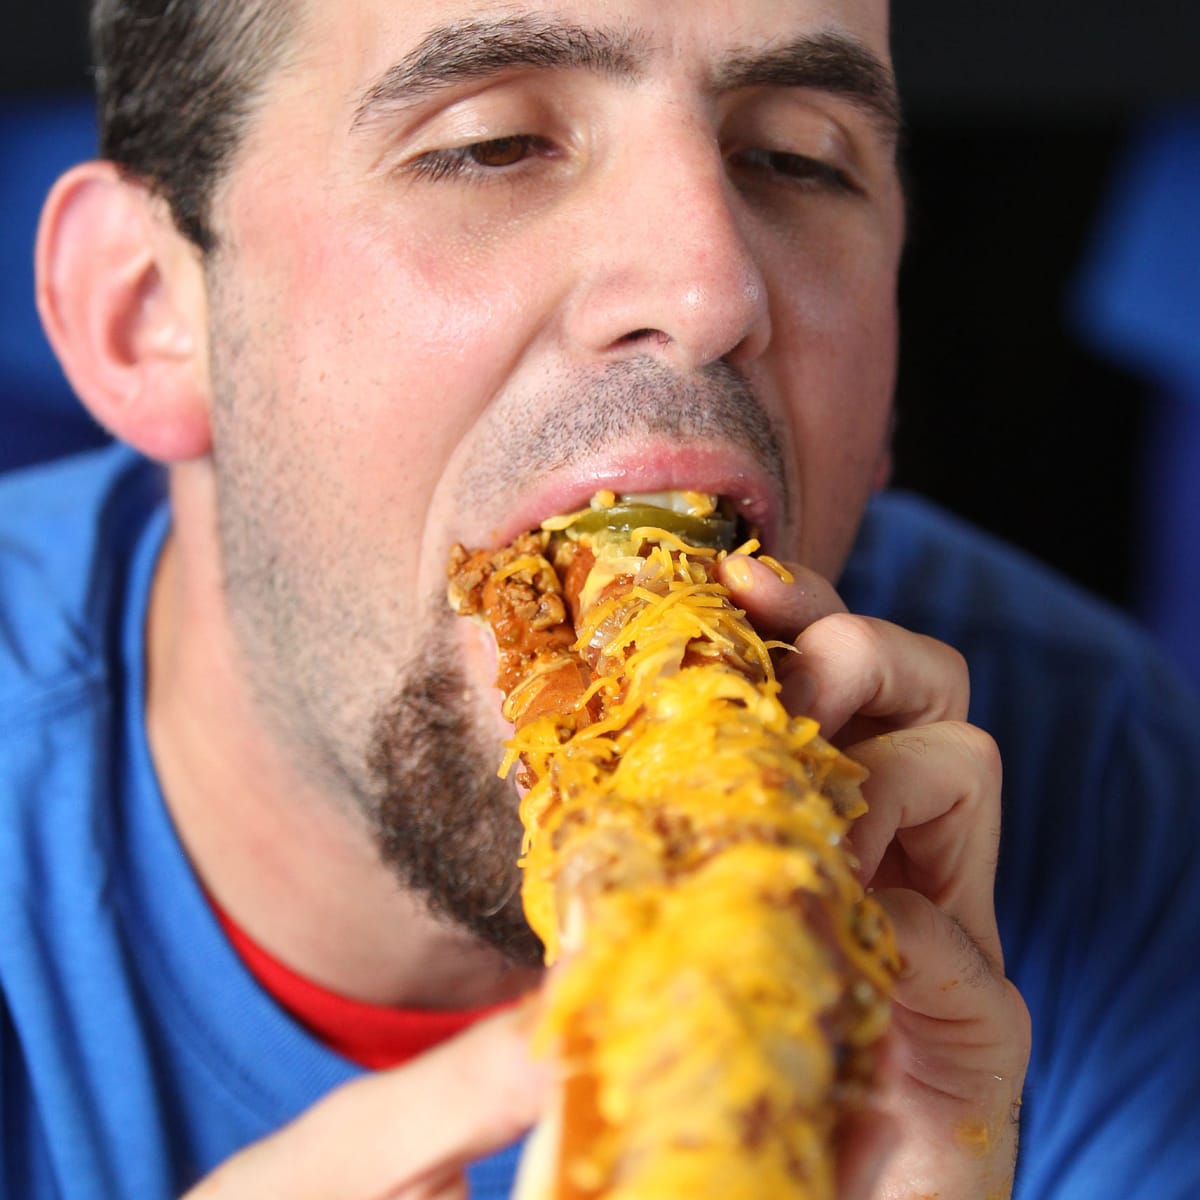 Fenway Frank? Dodger Dog? Rangers Boomstick? In search of MLB's best hot dog  … – The Ross News